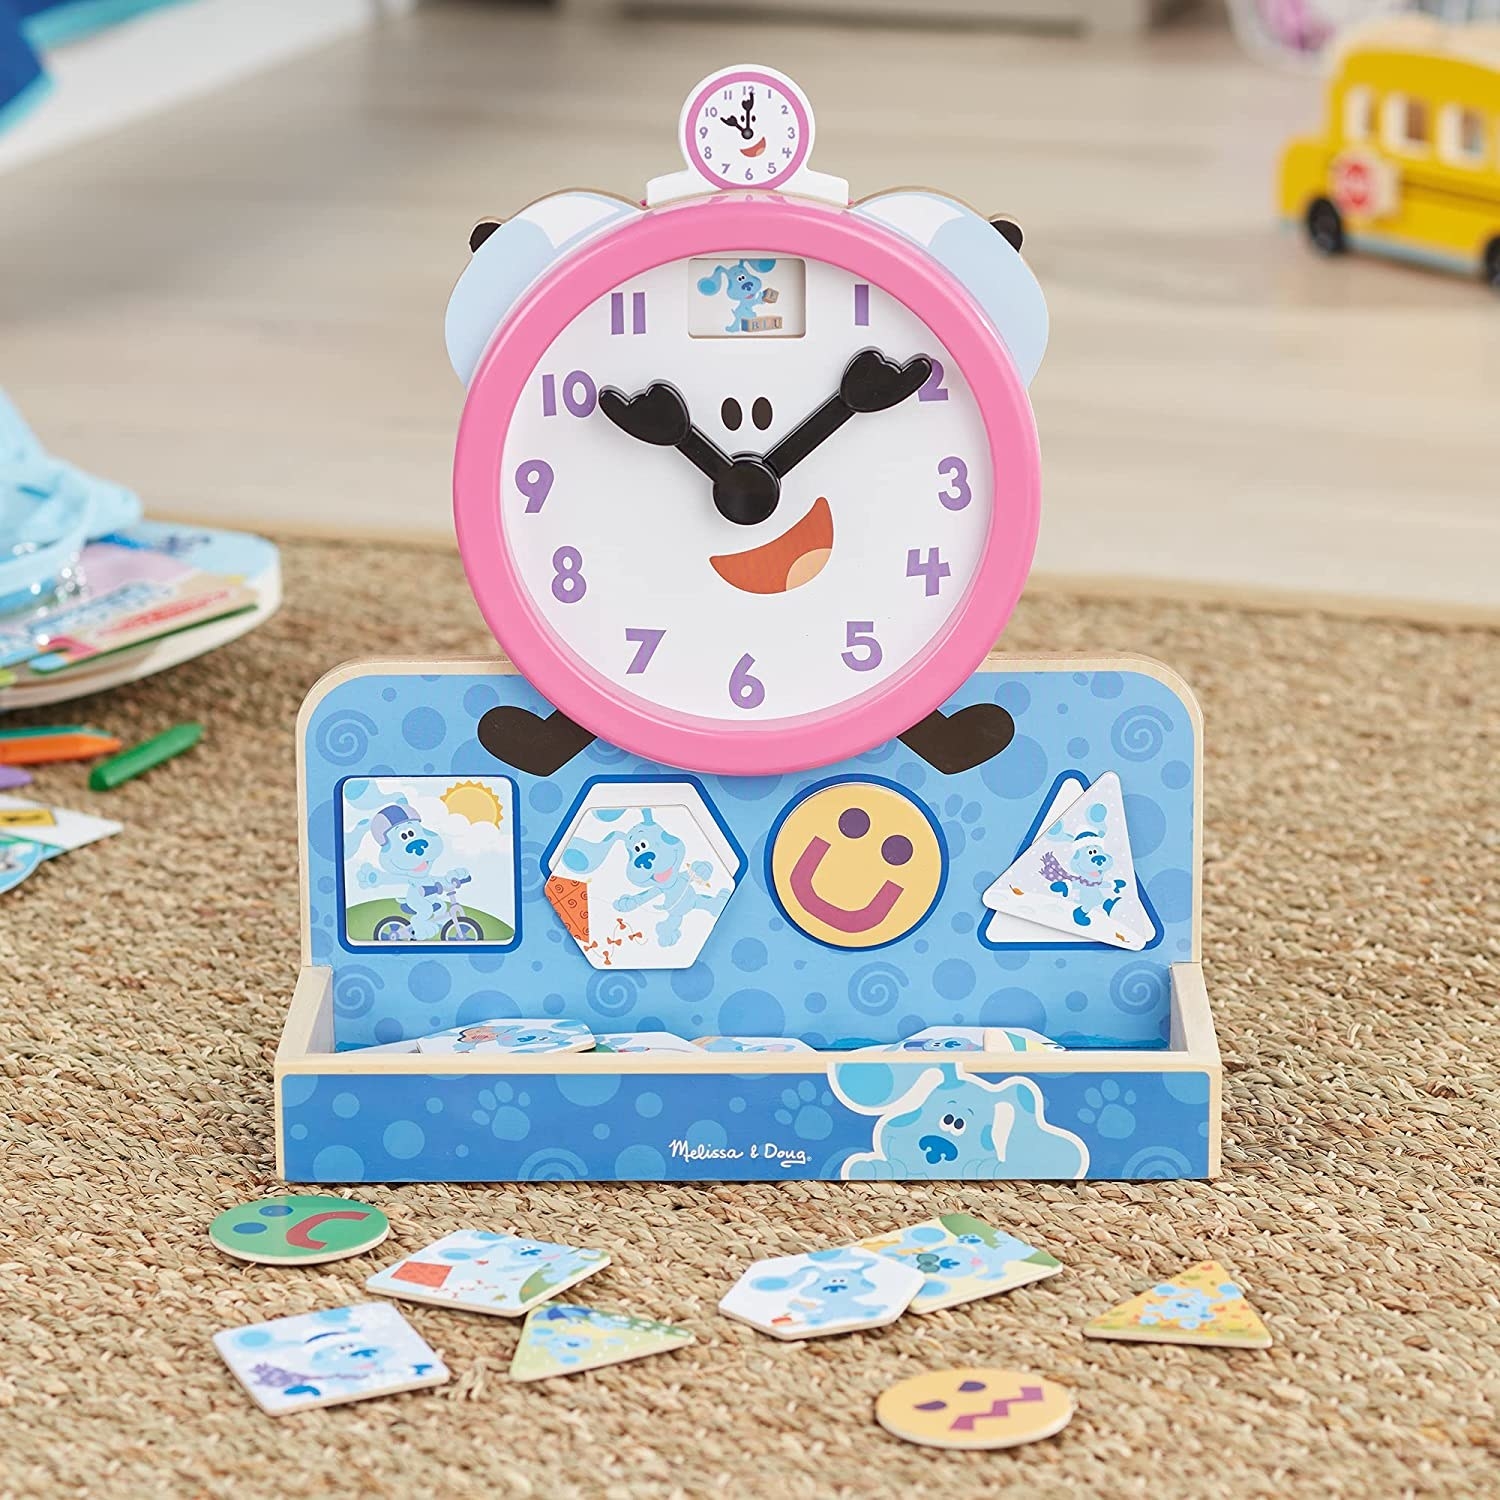 The pink wooden clock with a blue storage base and wooden magnets